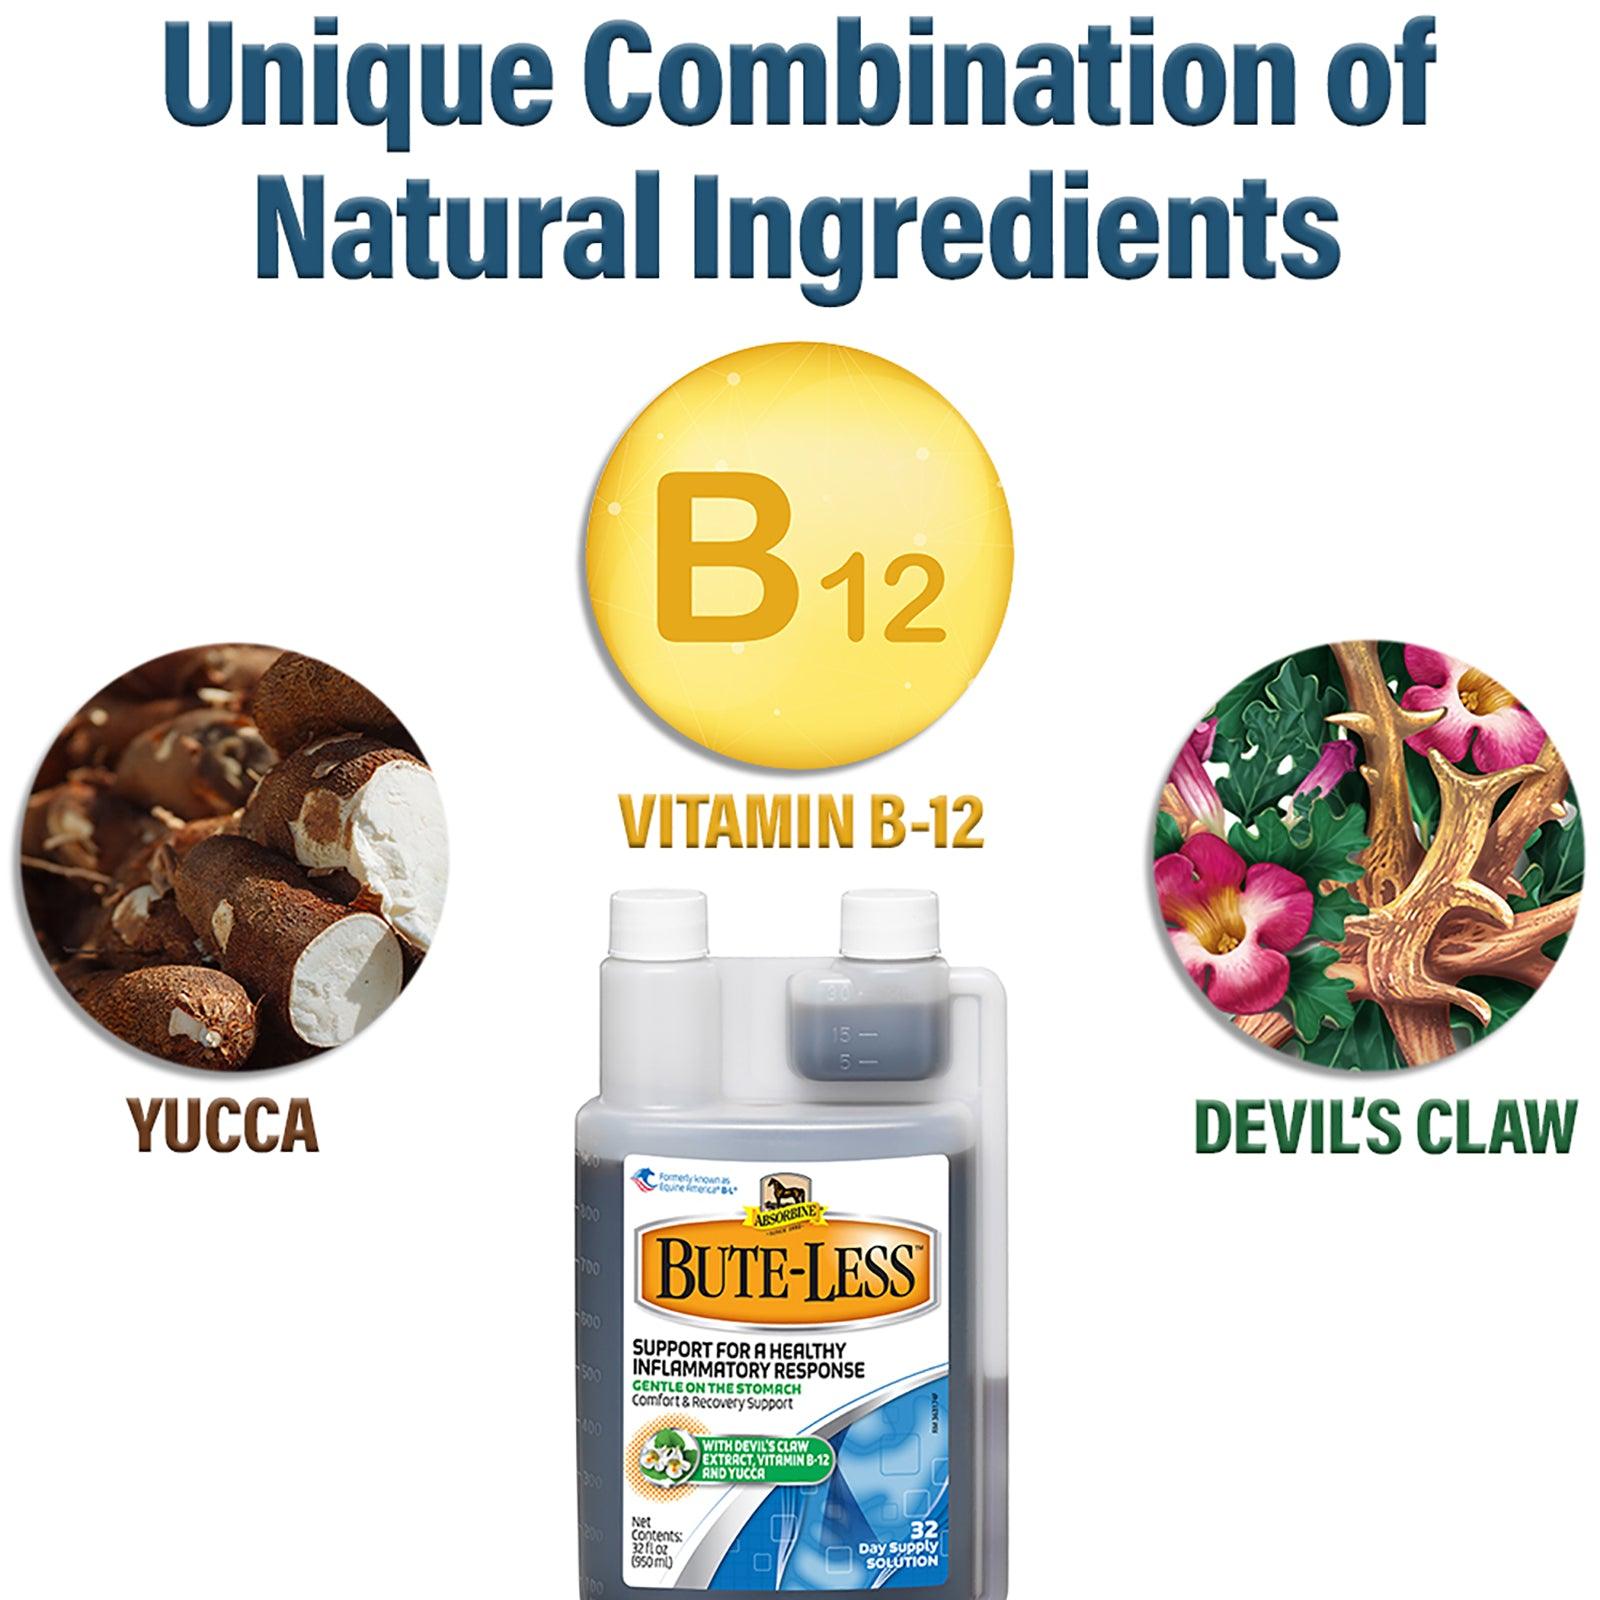 Bute-less 32 fluid oz. Solution. "Unique combination of natural ingredients".  Containing Yucca, Vitamin B12, and Devil's Claw.